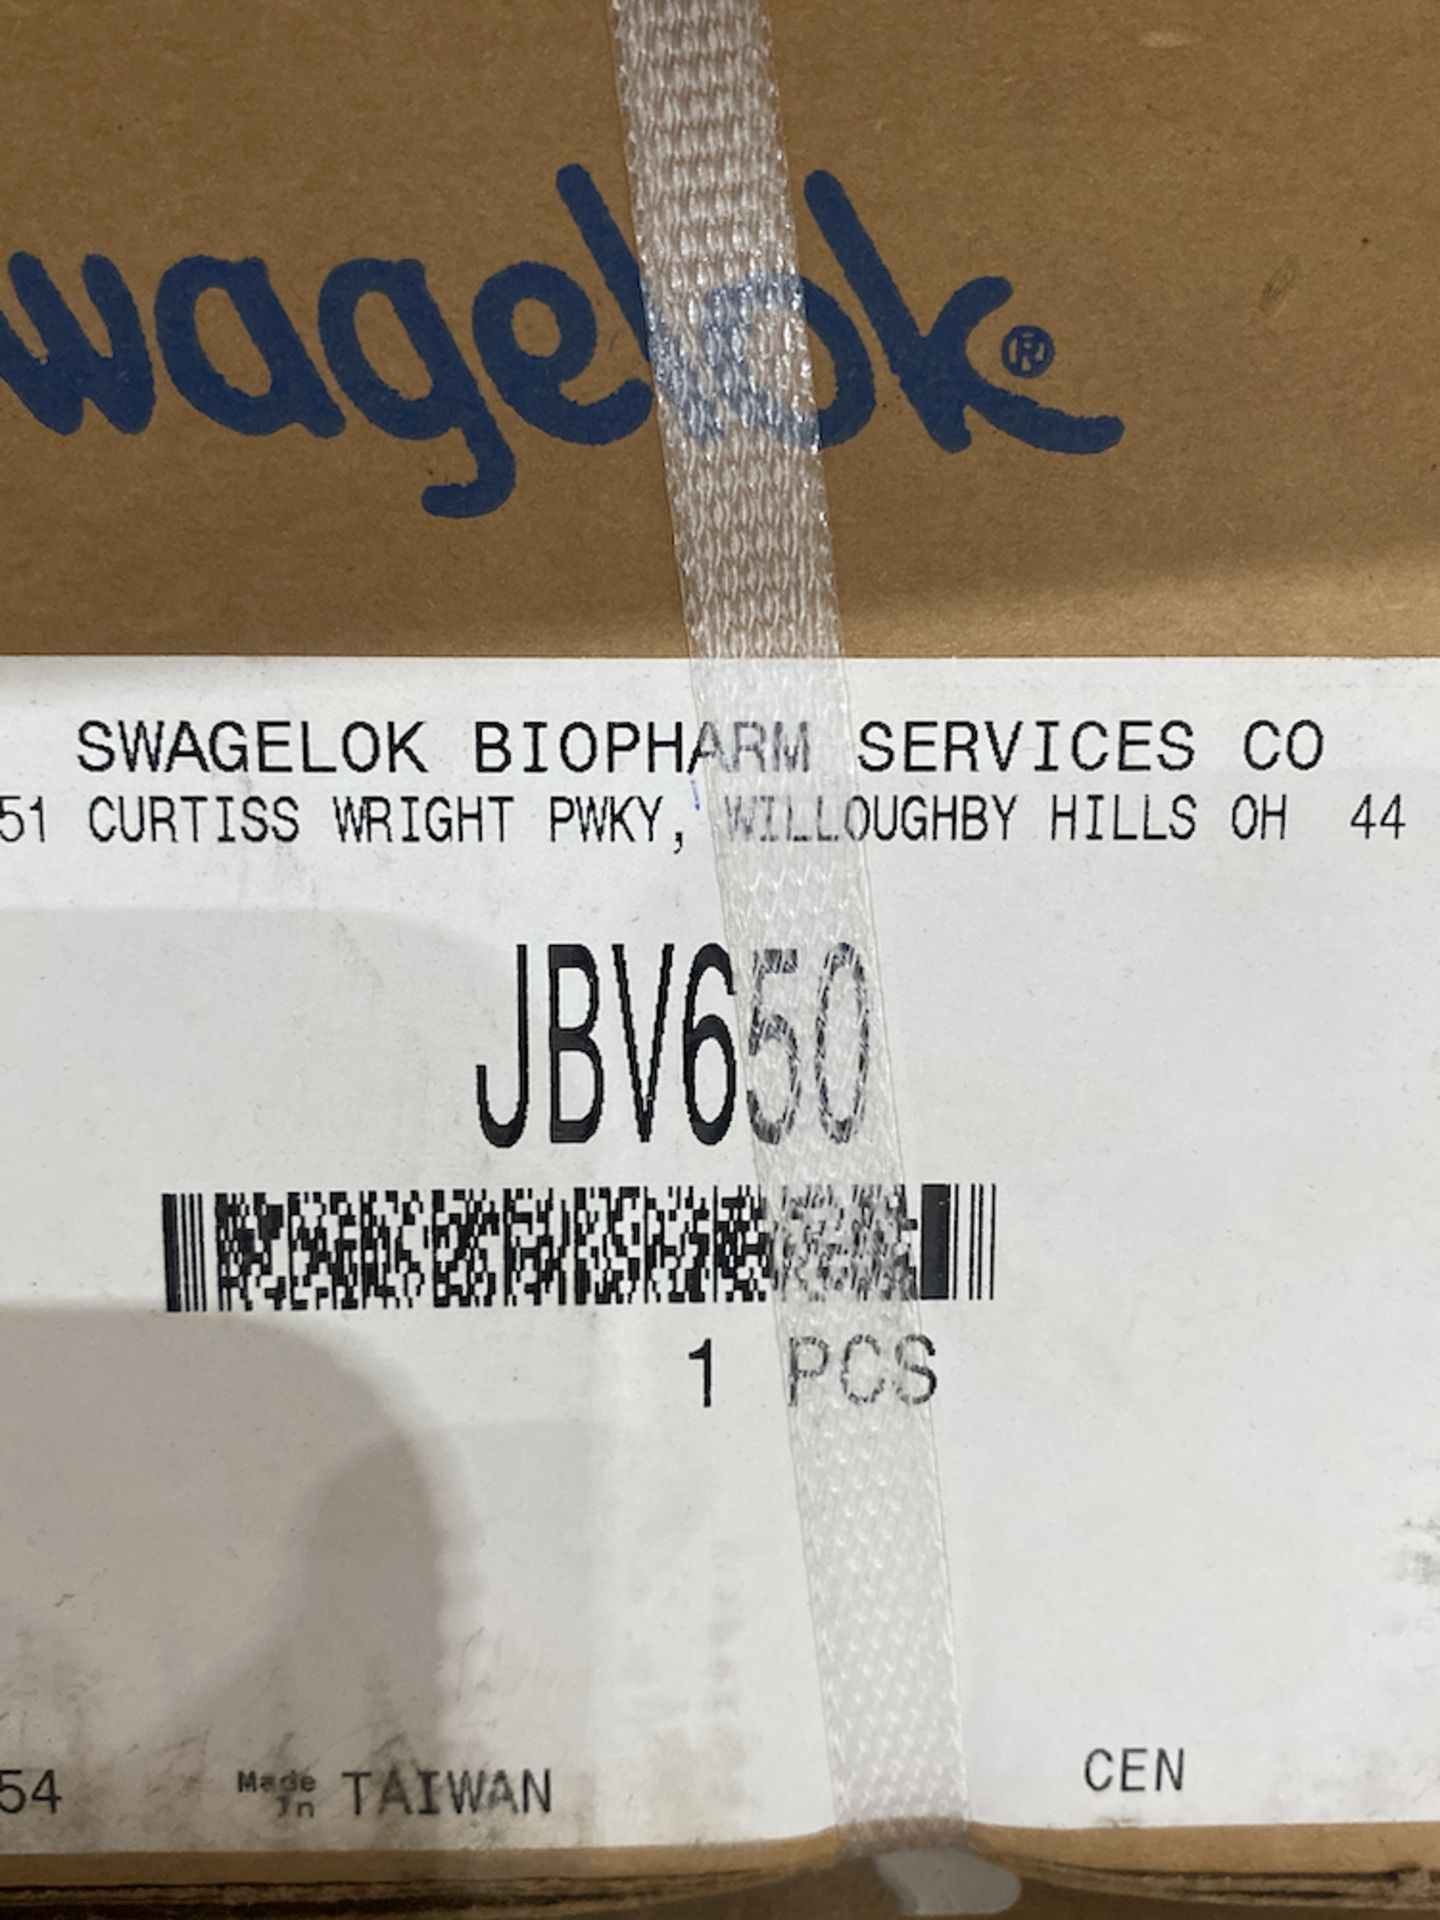 NEW IN THE BOX LOT OF 2 SWAGELOK JBV650 STAINLESS STEEL BALL VALVES - Image 2 of 3